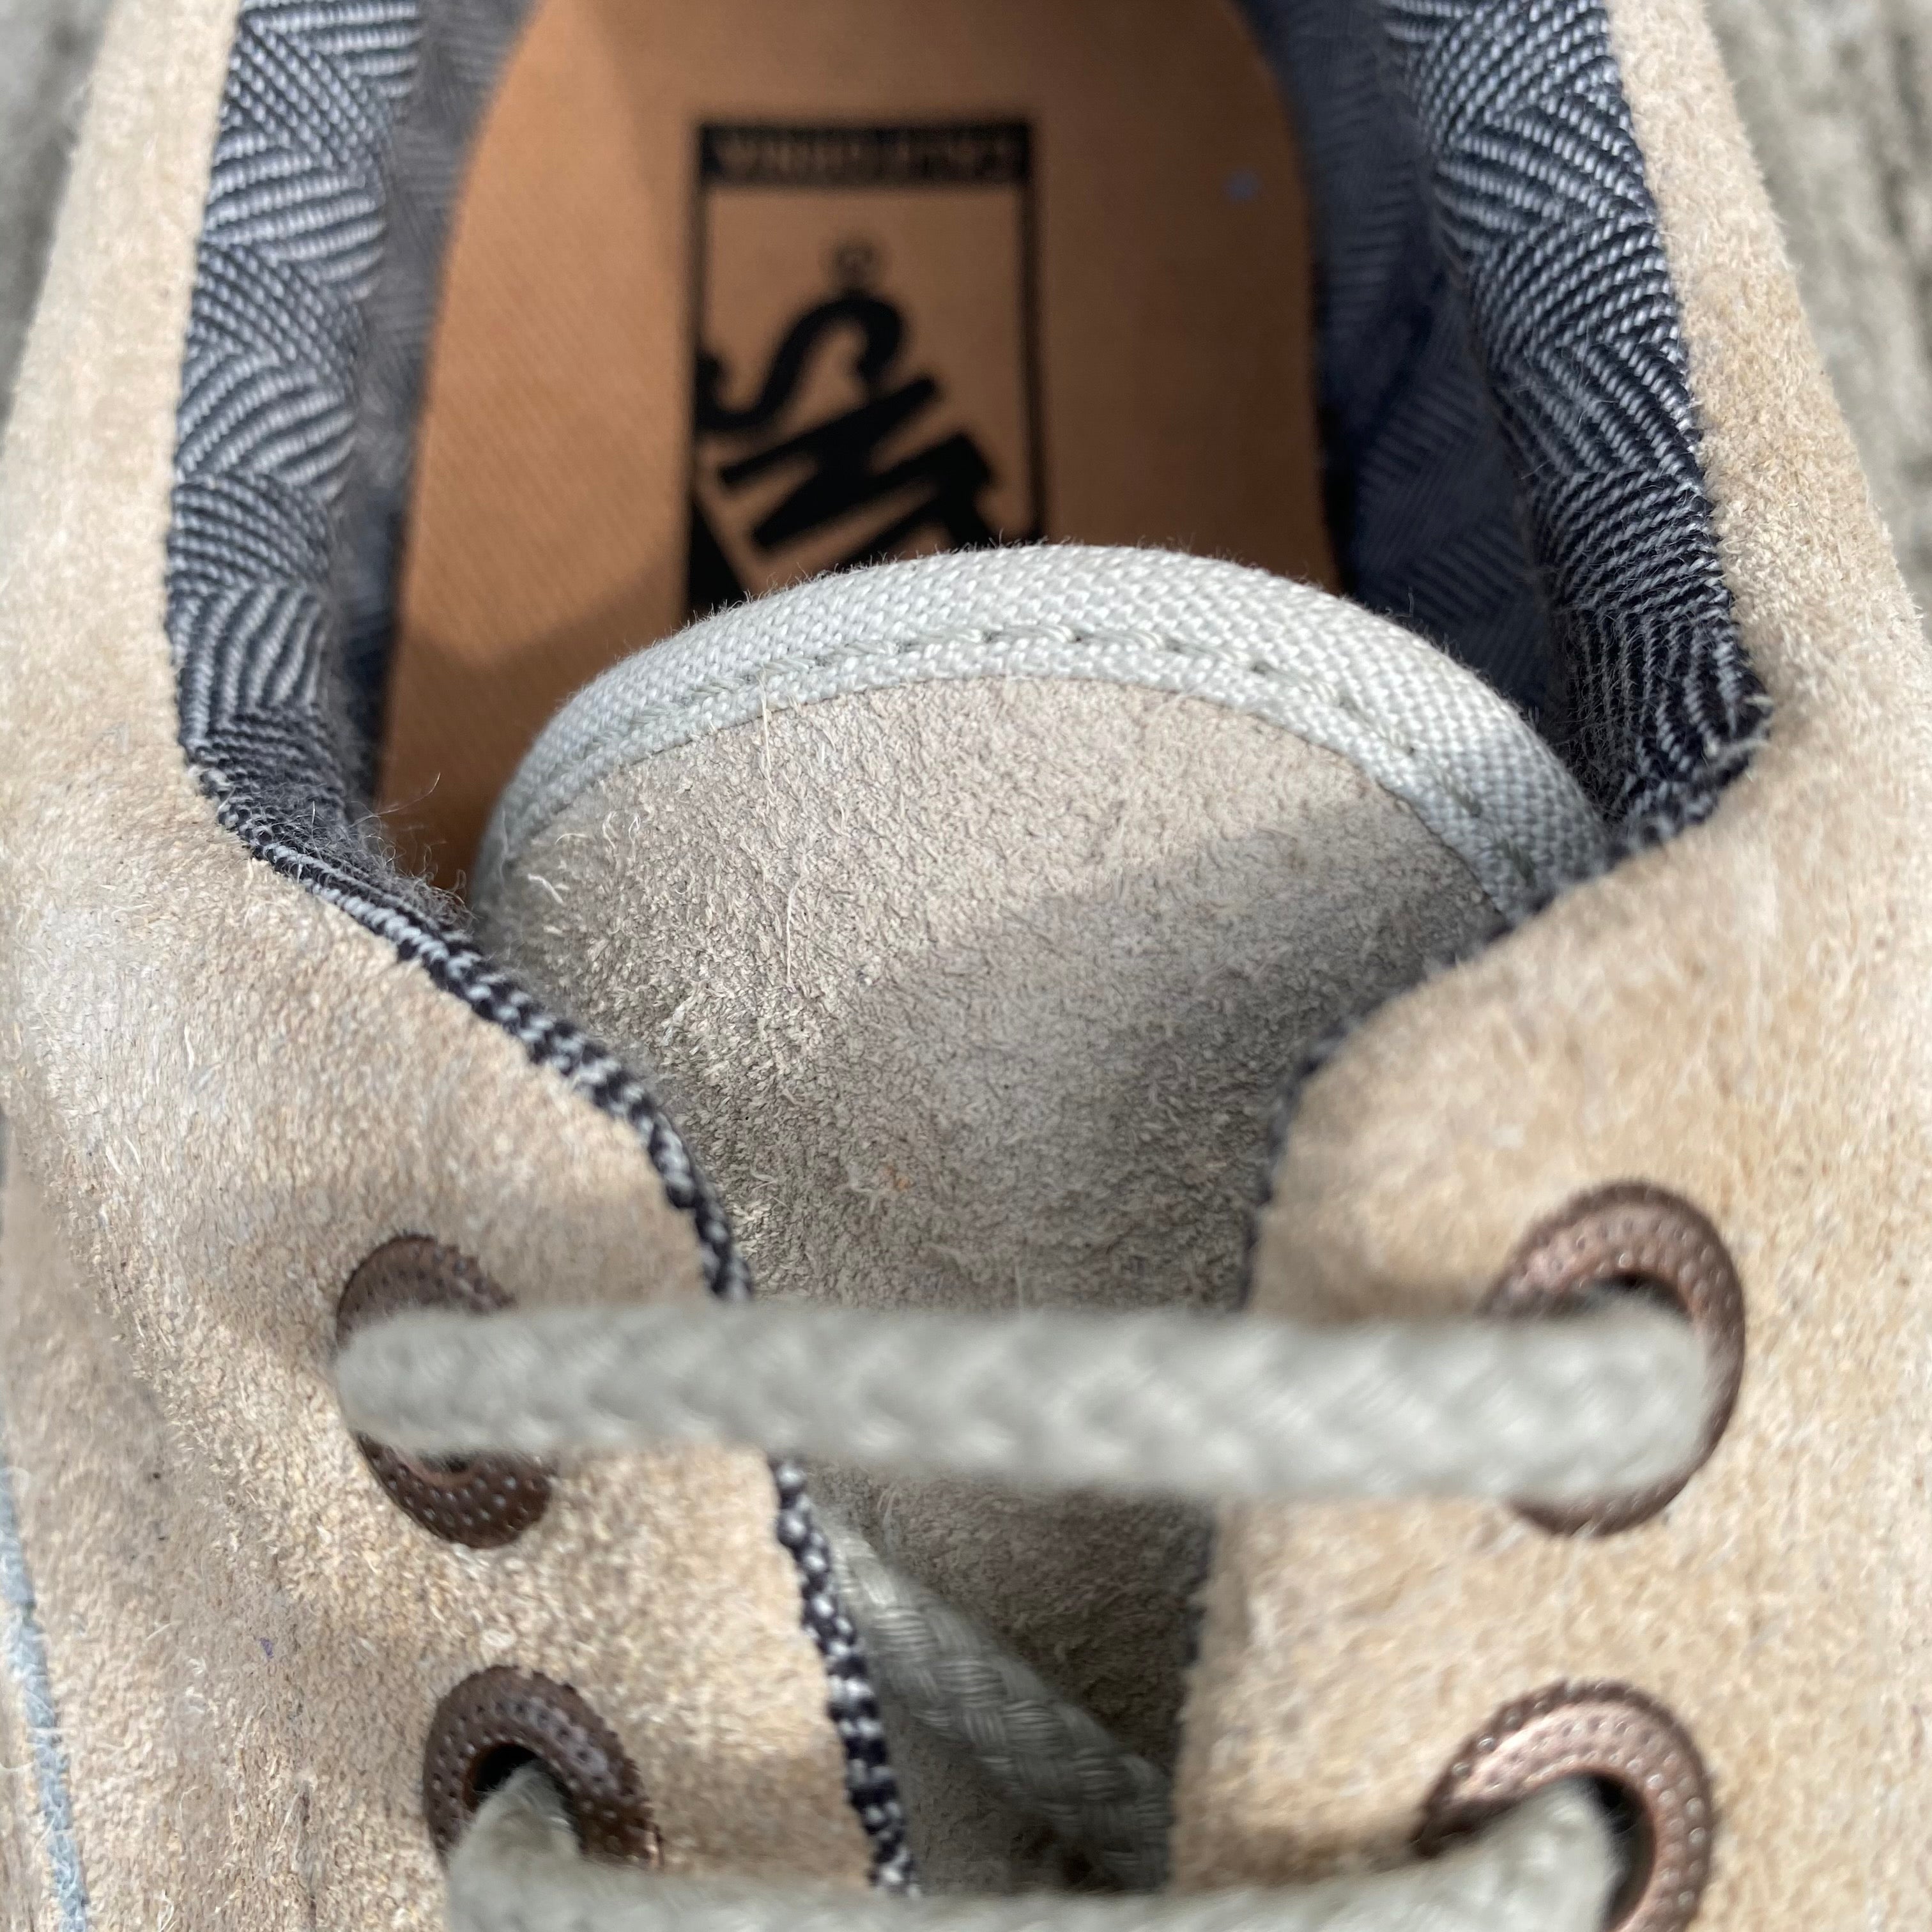 [FINAL ONE!] Era 59 CA (Hairy Suede) -VANS CALIFORNIA COLLECTION-